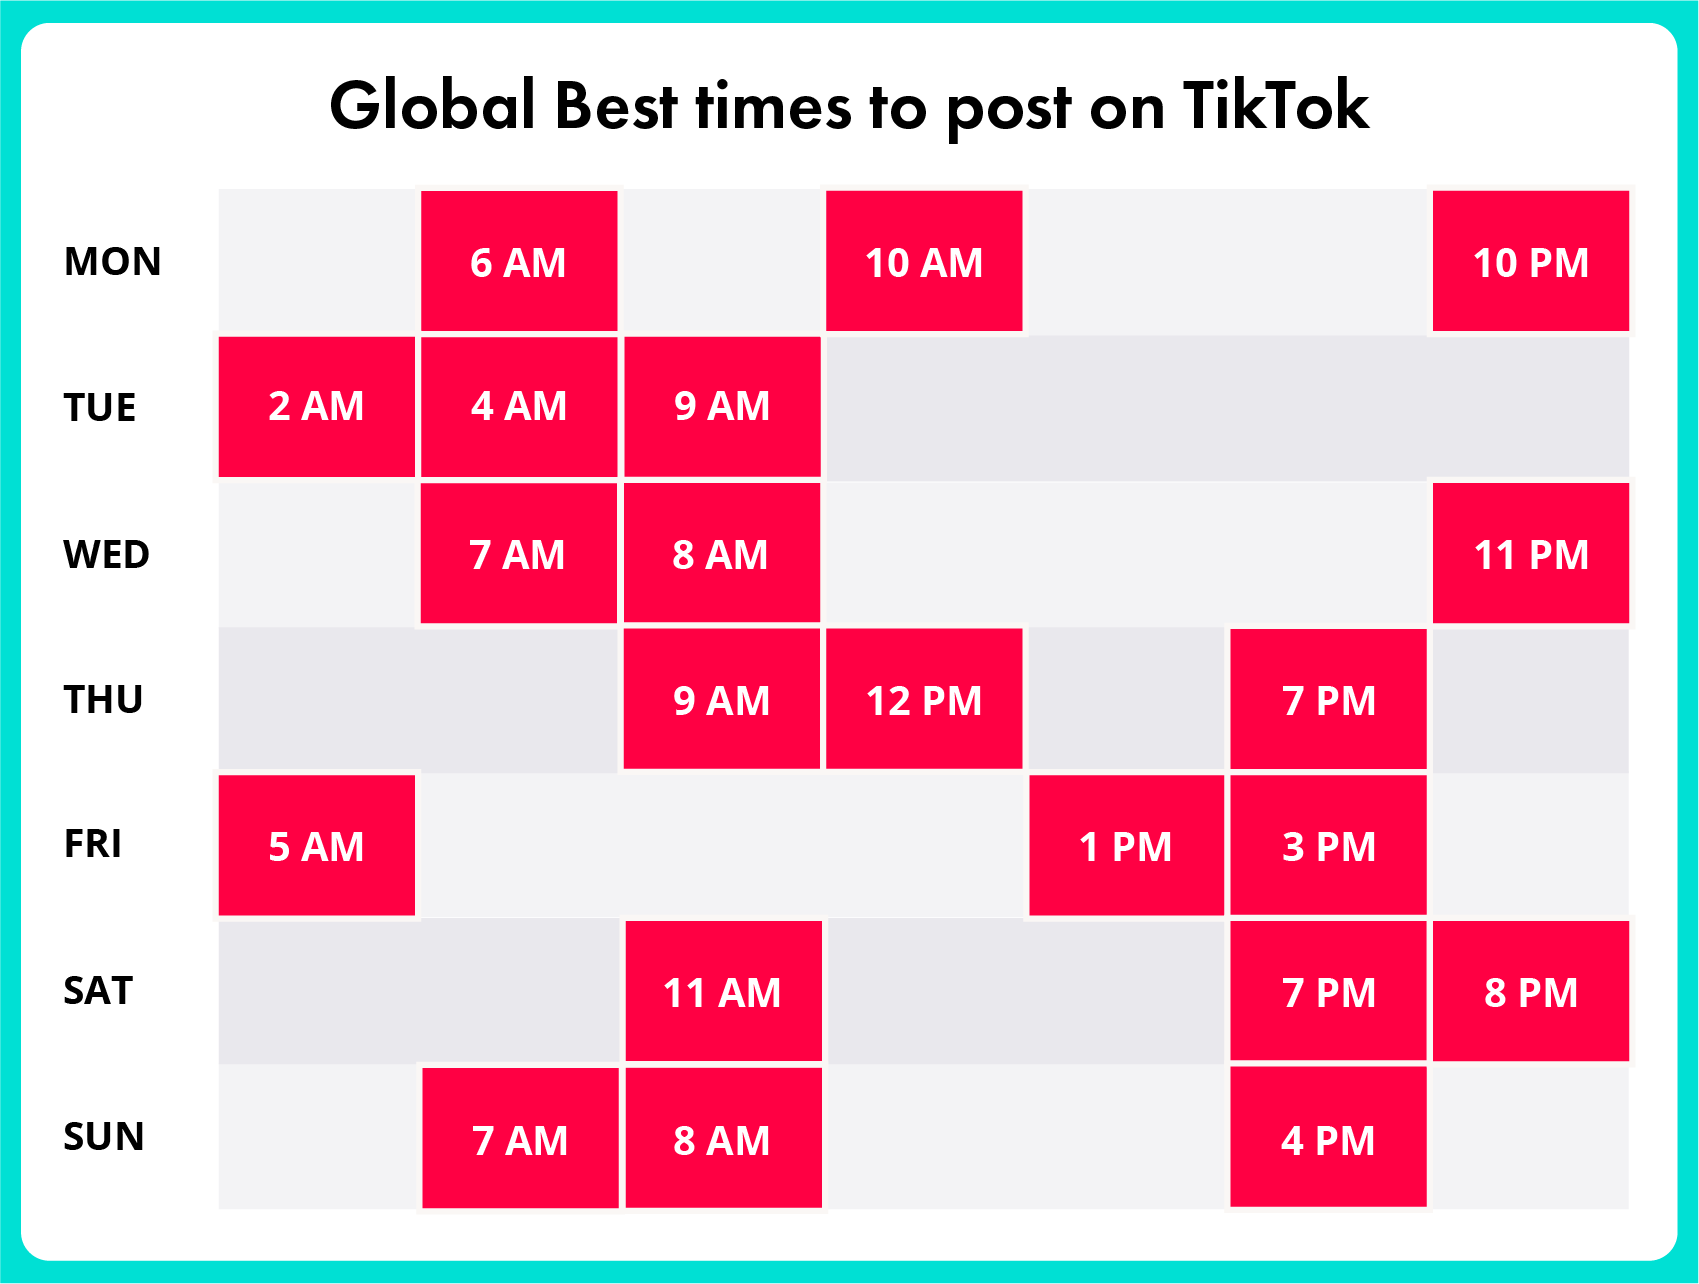 best times to post on TikTok for each day